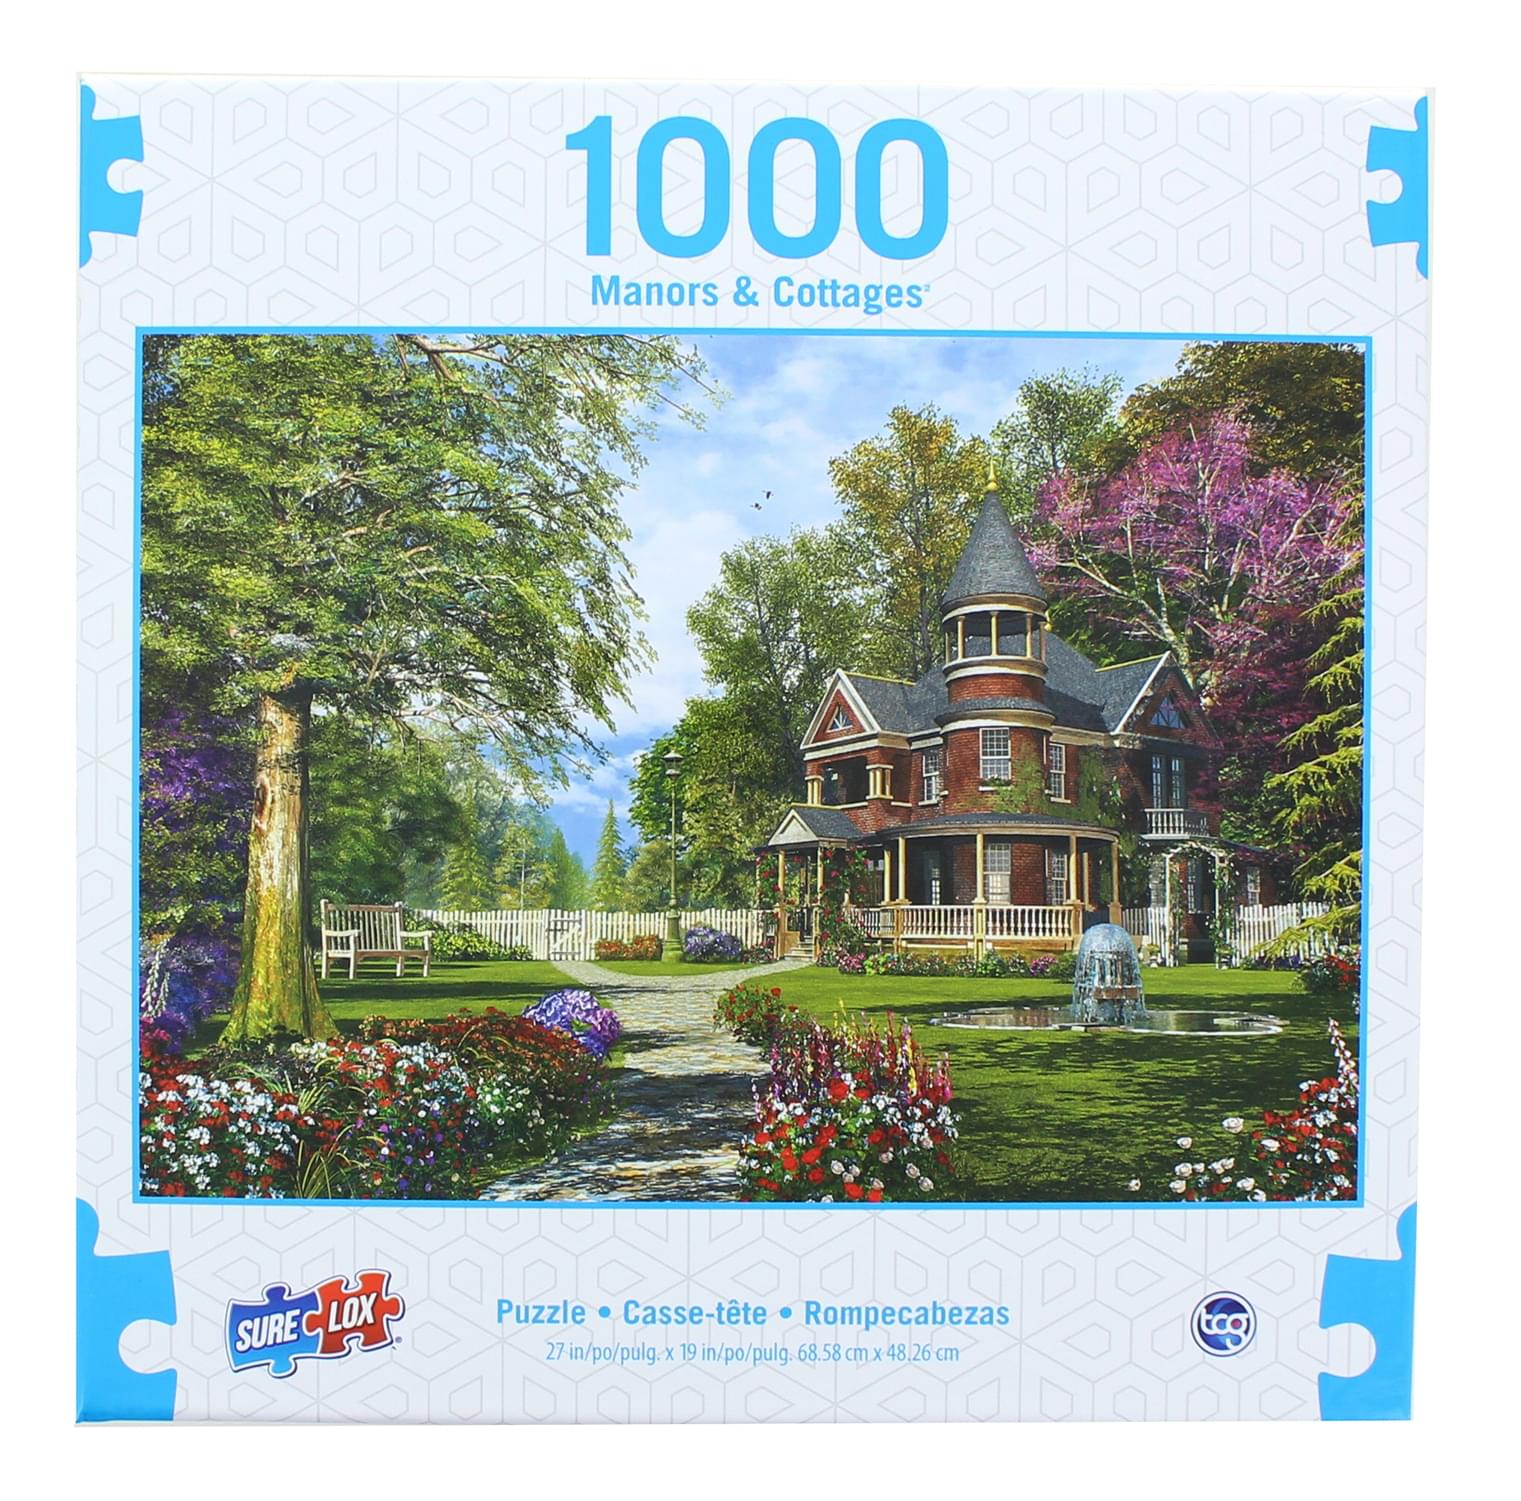 Manors & Cottages 1000 Piece Jigsaw Puzzle | Late Summer Garden